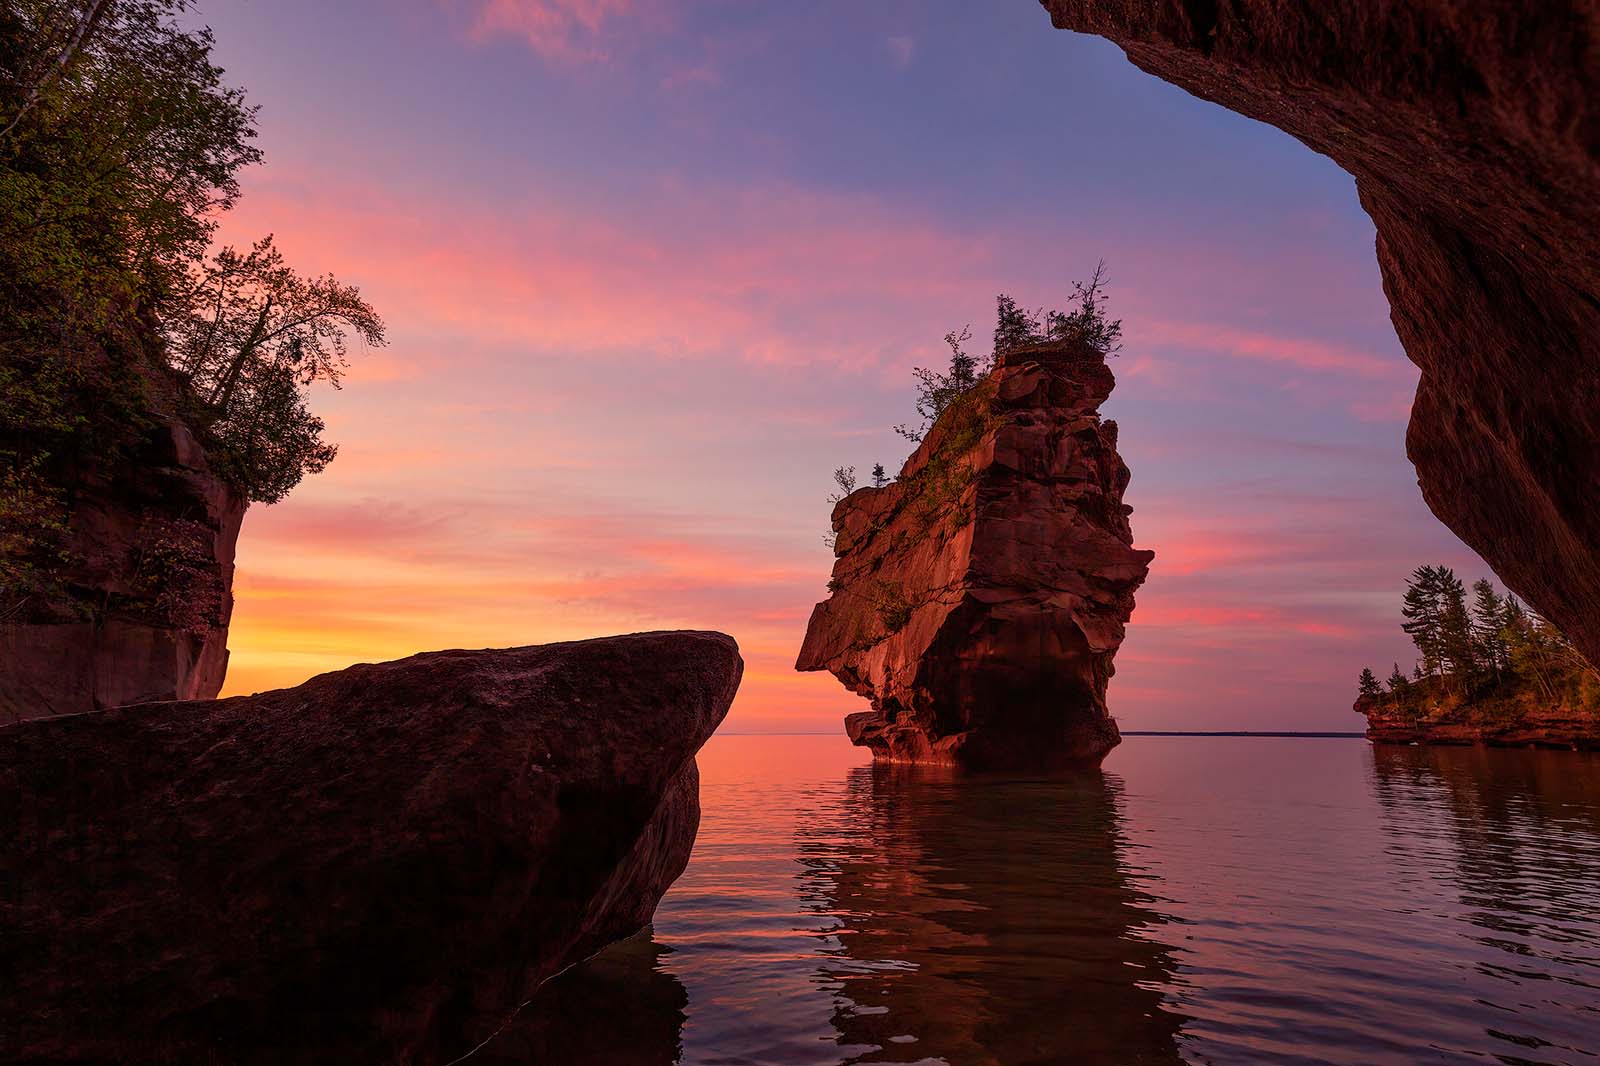 A sandstone sea stack under gorgeous skies during sunrise on stockton island in the apostle islands.